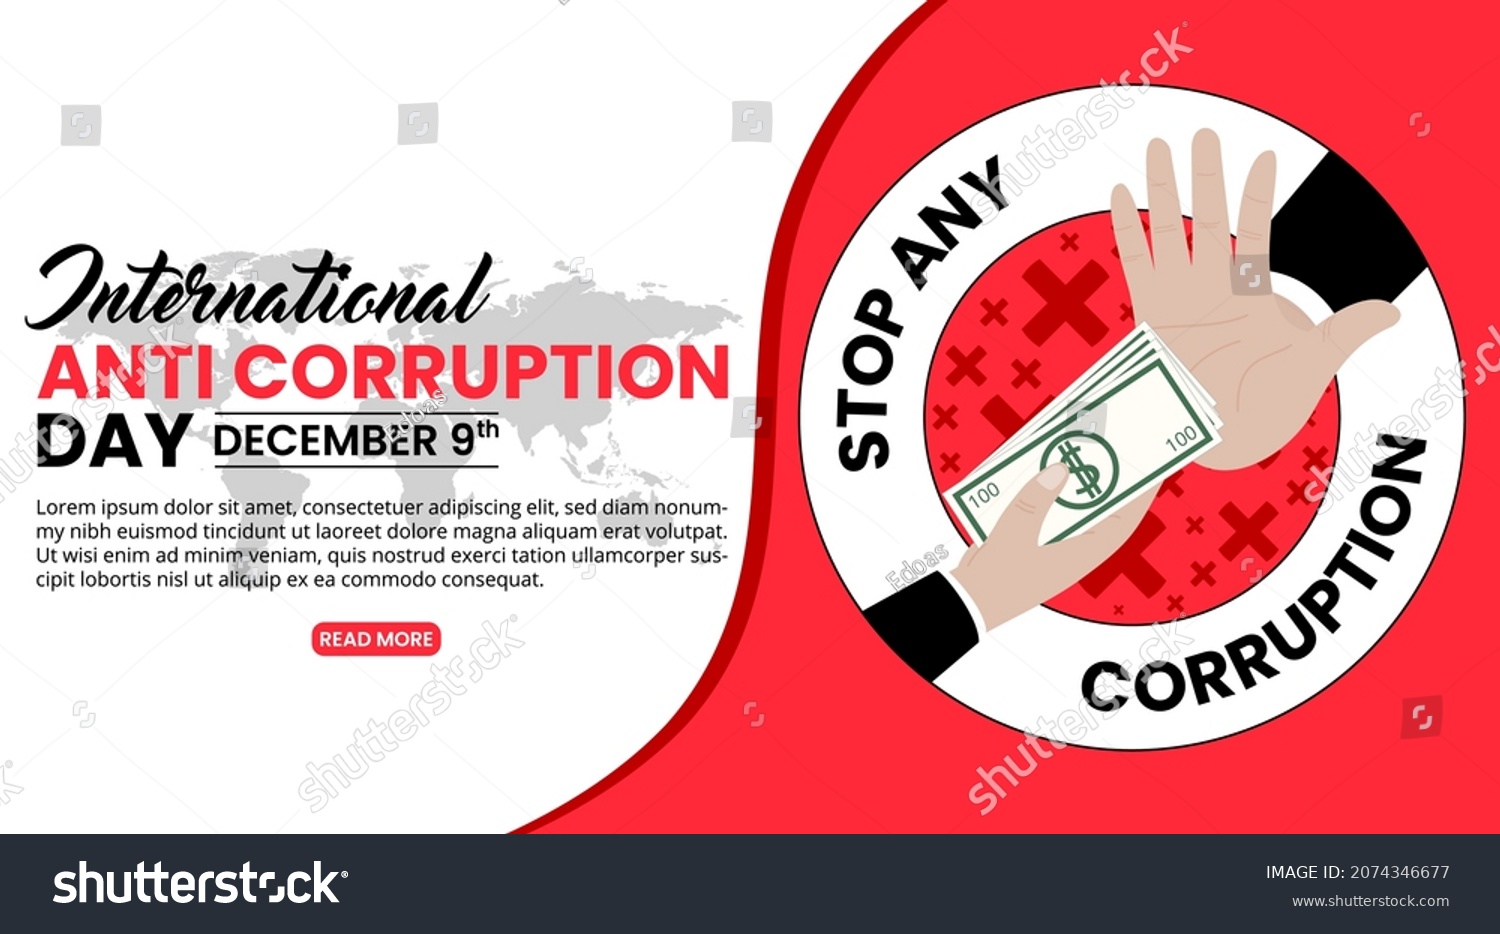 SVG of International anti corruption day background with hands illustrated as rejected bribery action svg